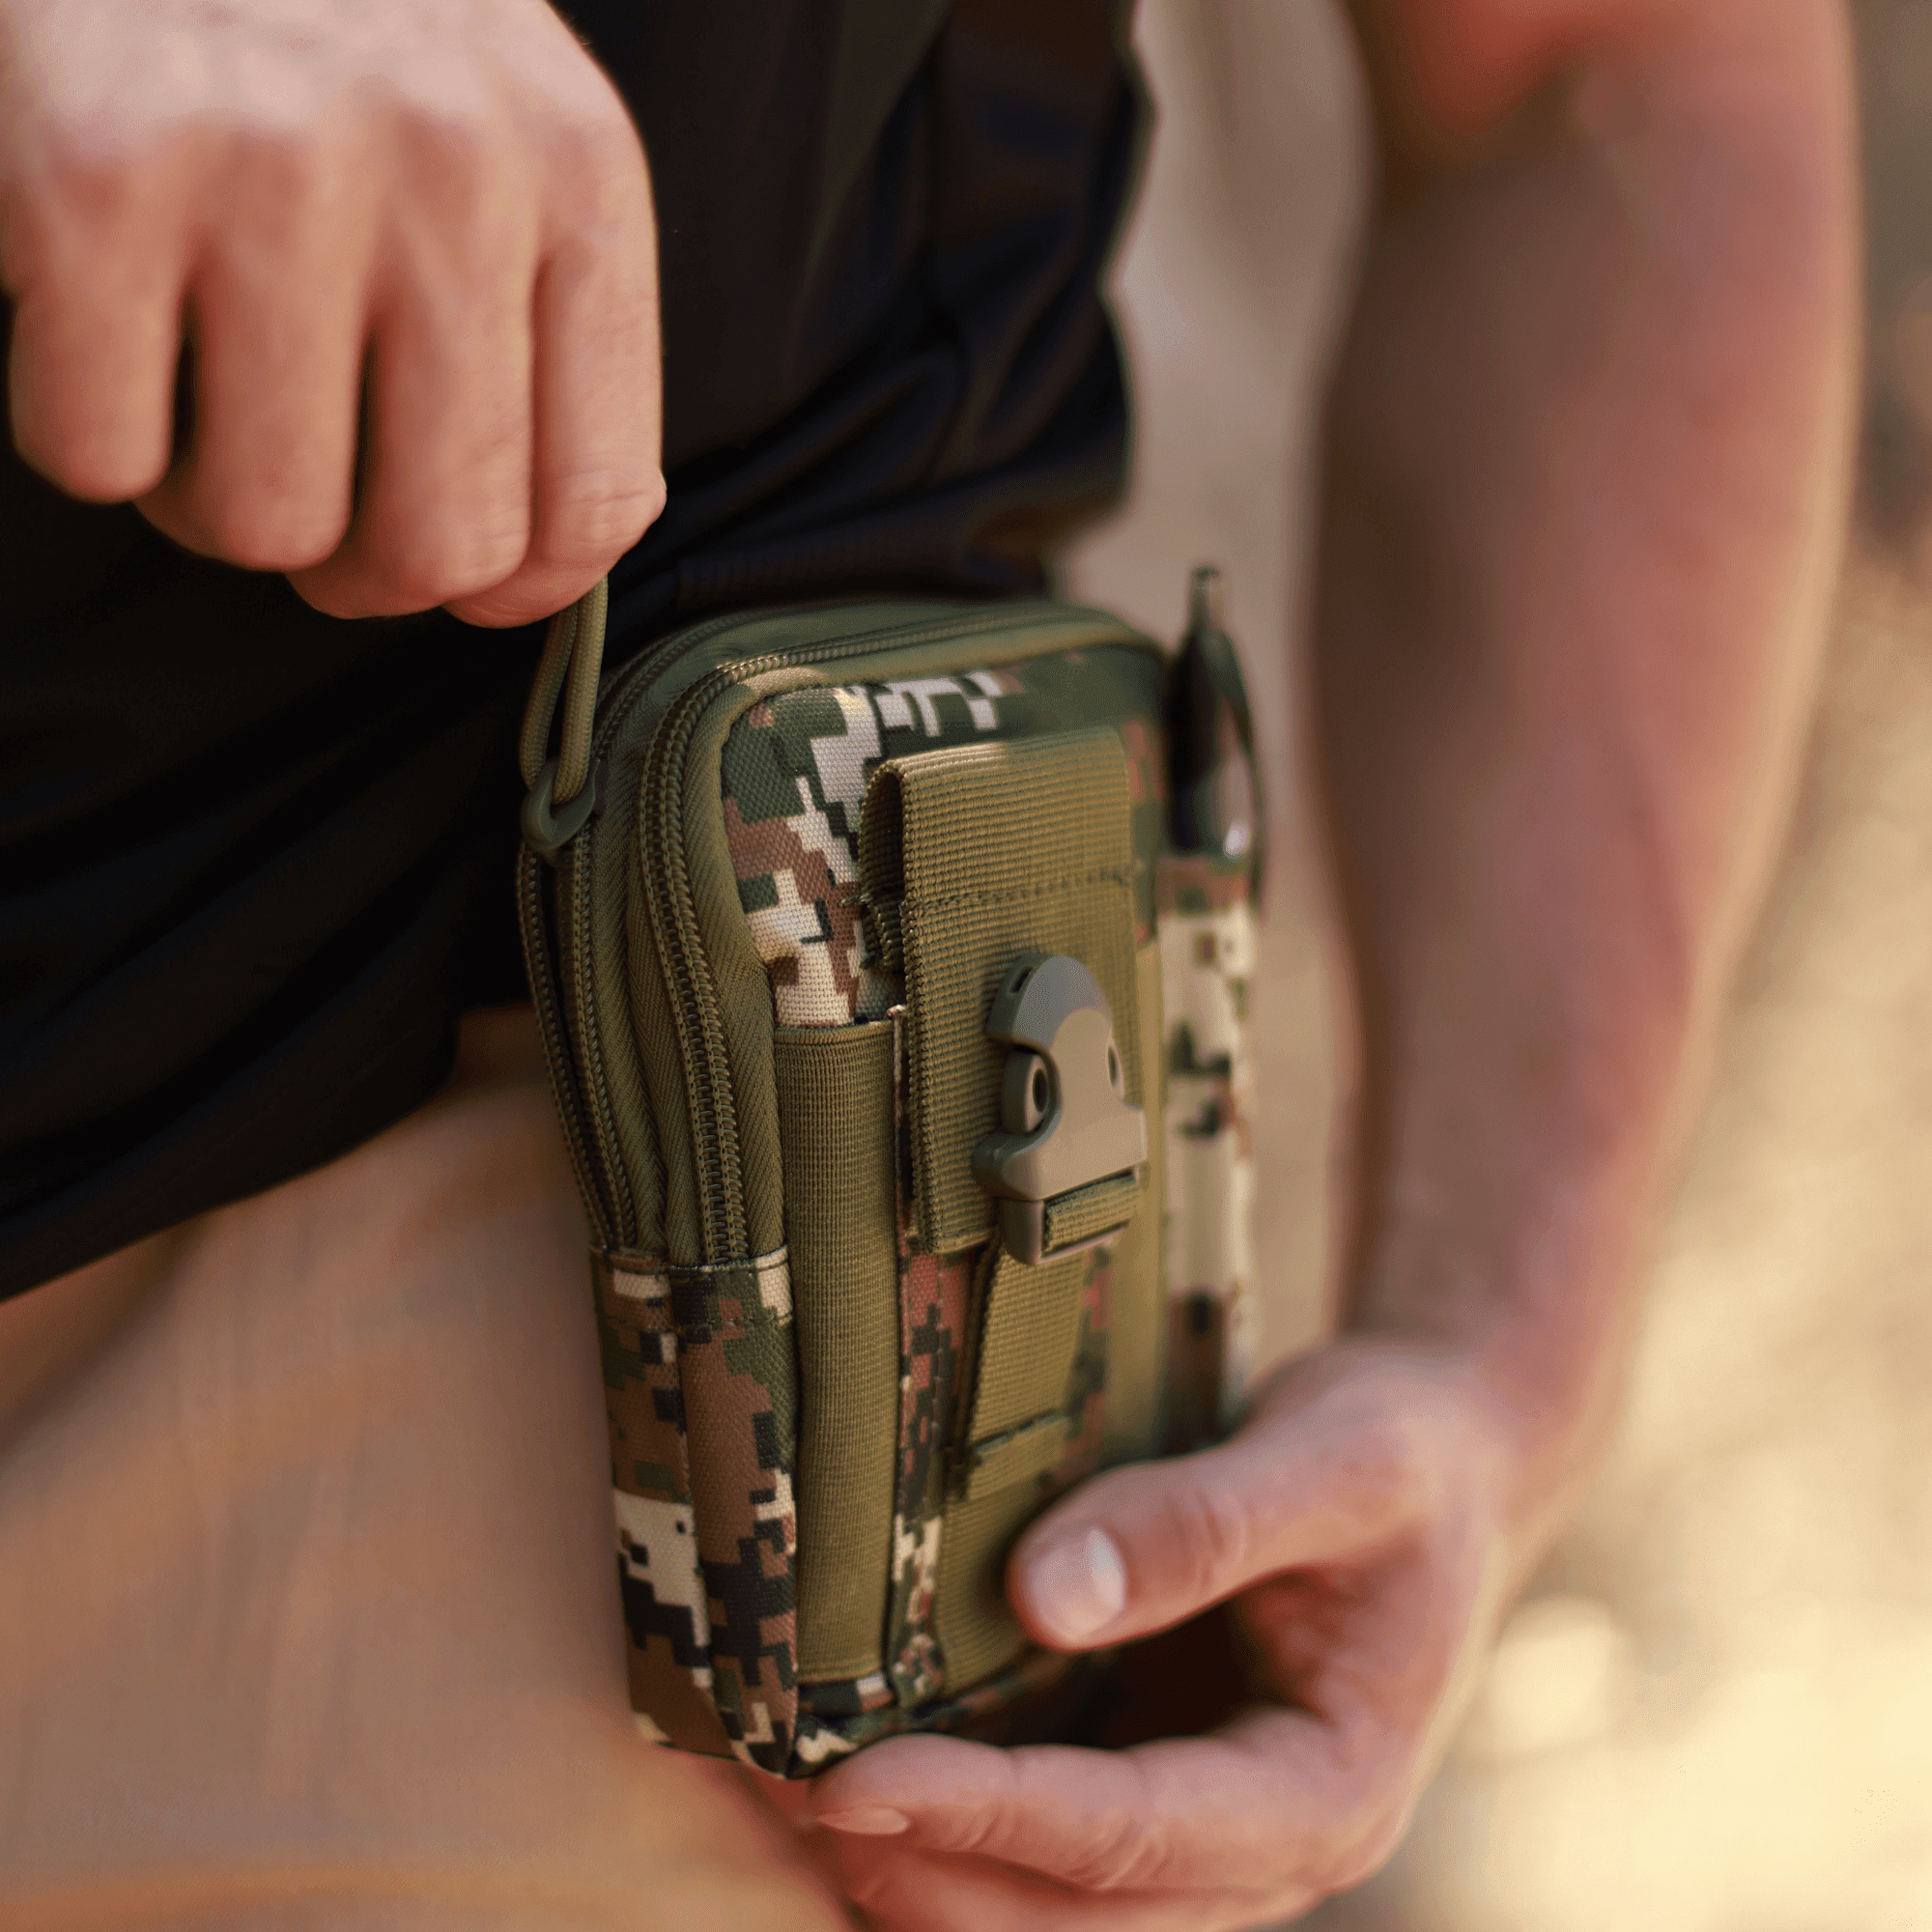 JupiterGear Tactical Waist Bag and MOLLE EDC Pouch For Outdoor Activities